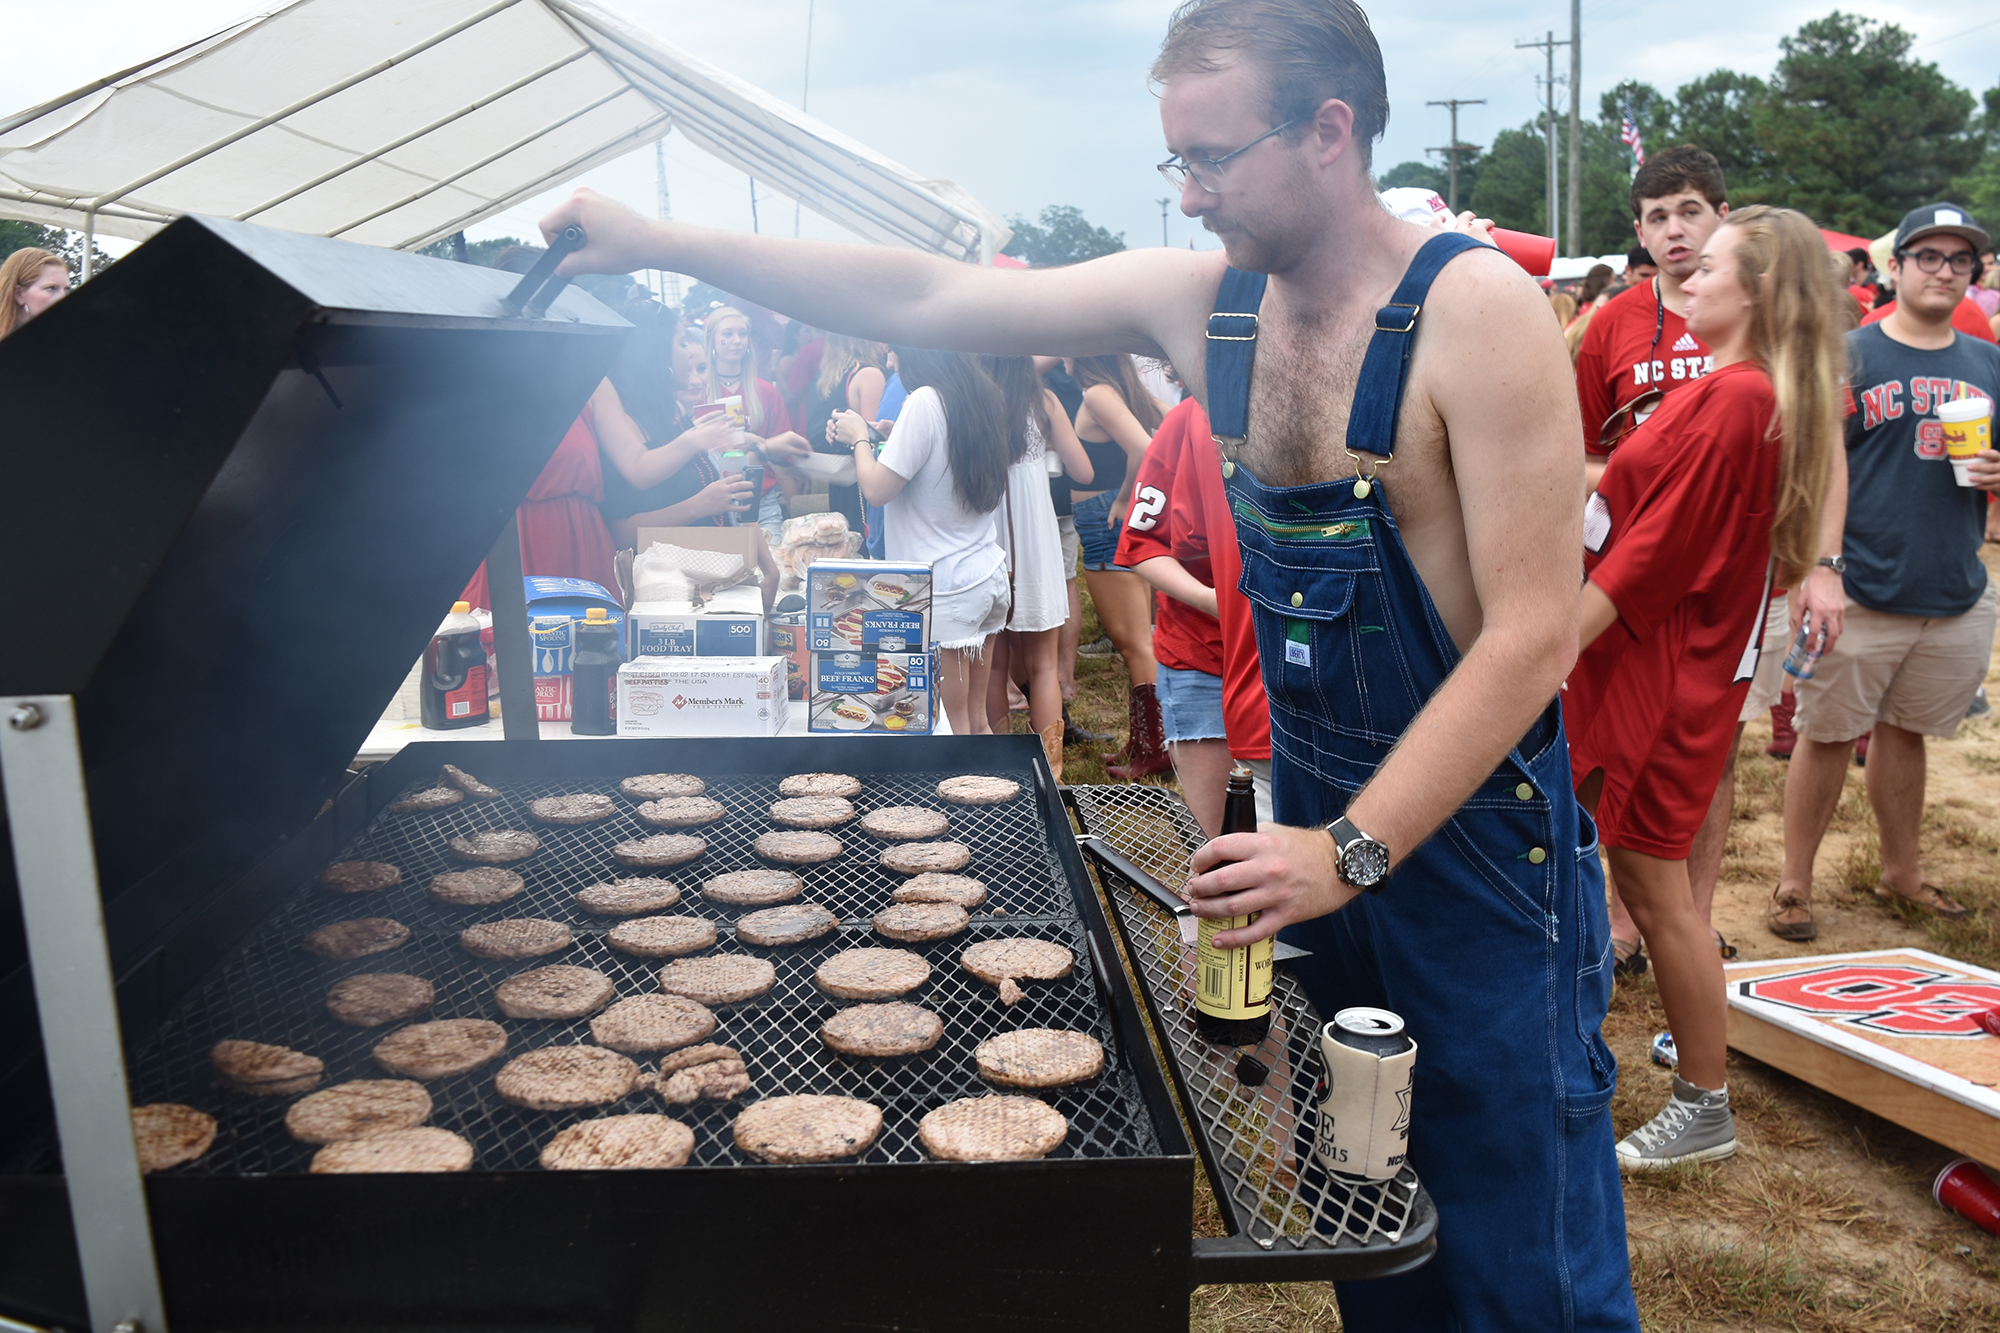 James Stonecypher, a junior in environmental technology and management, grills out at the William and Mary football game held at Carter Finley Stadium on Sept. 1. Stonecypher poured worcestershire sauce on top of the meat to get ready to serve the food.